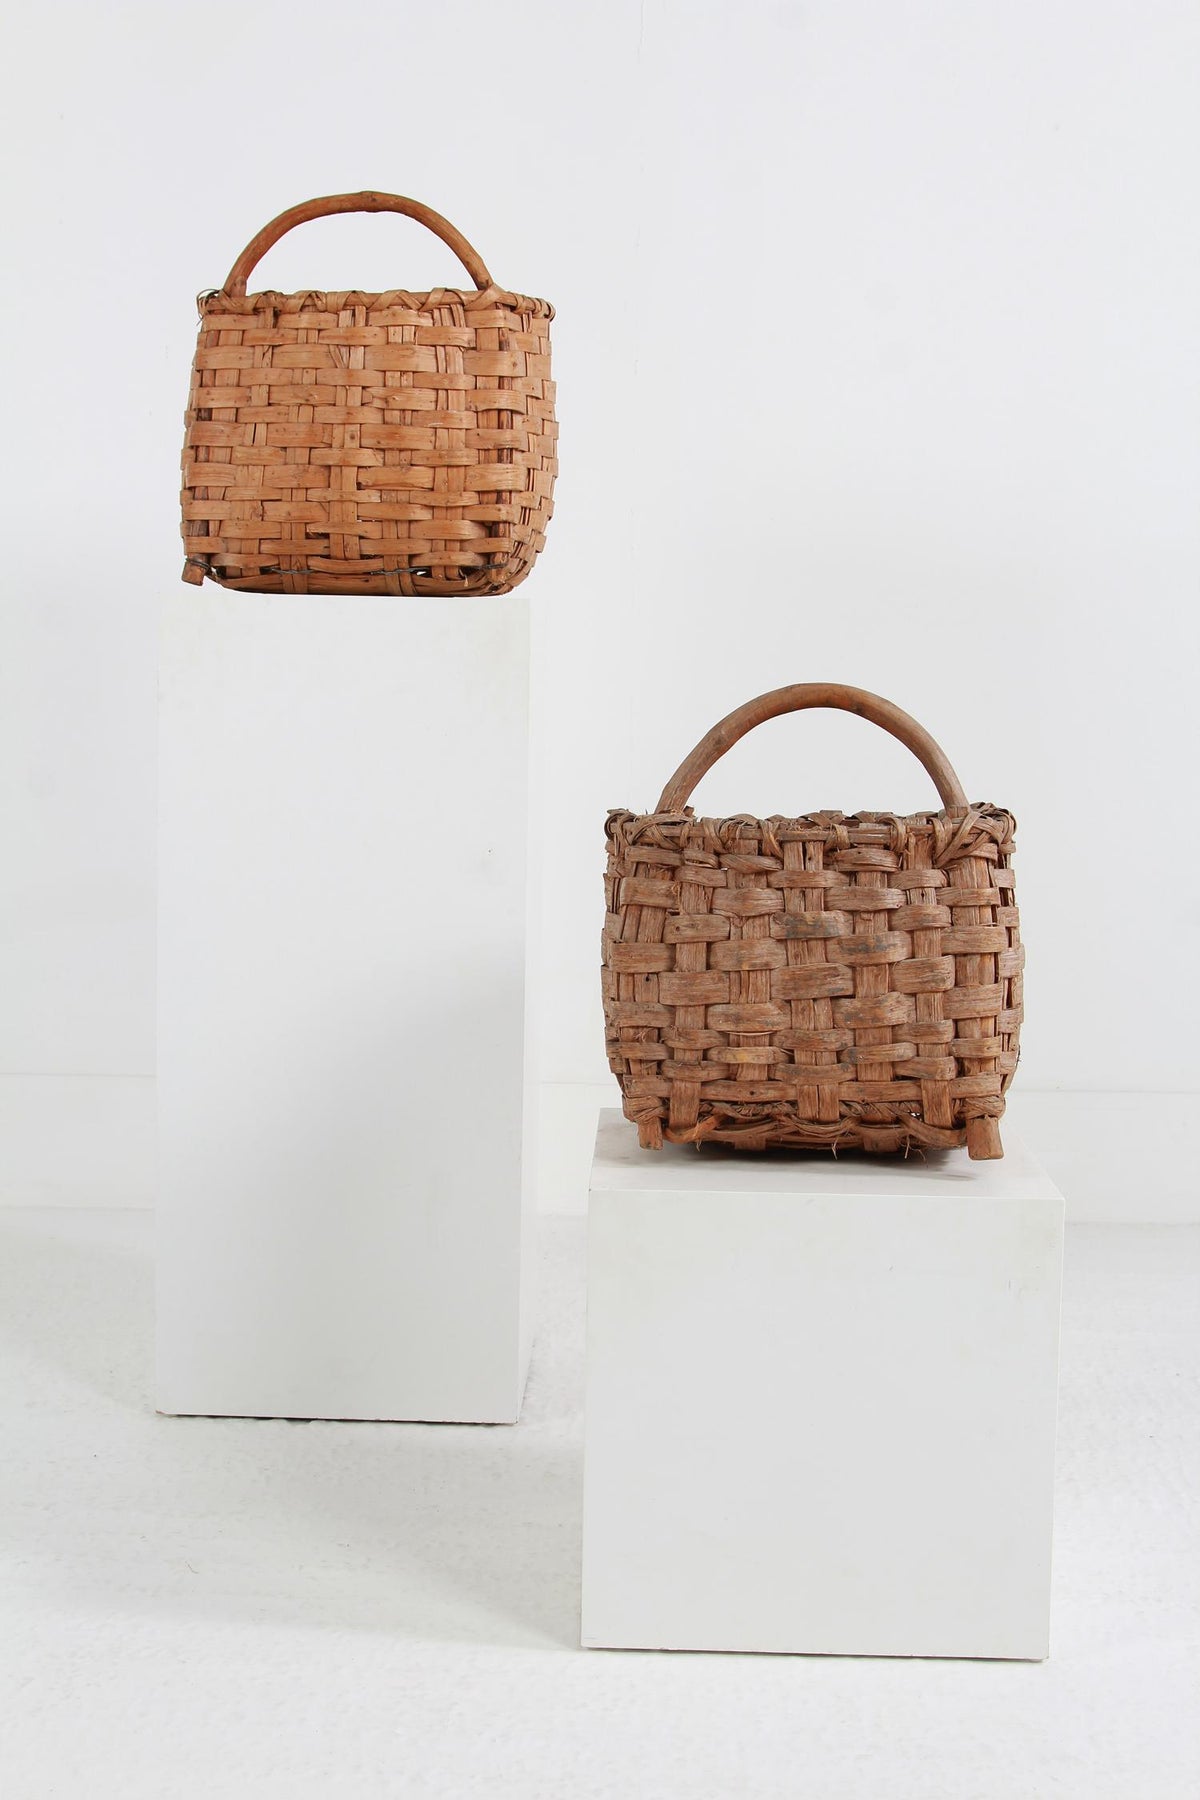 TWO SUPERBLY CRAFTED SWEDISH  SPLINT WOVEN BERRY BASKETS